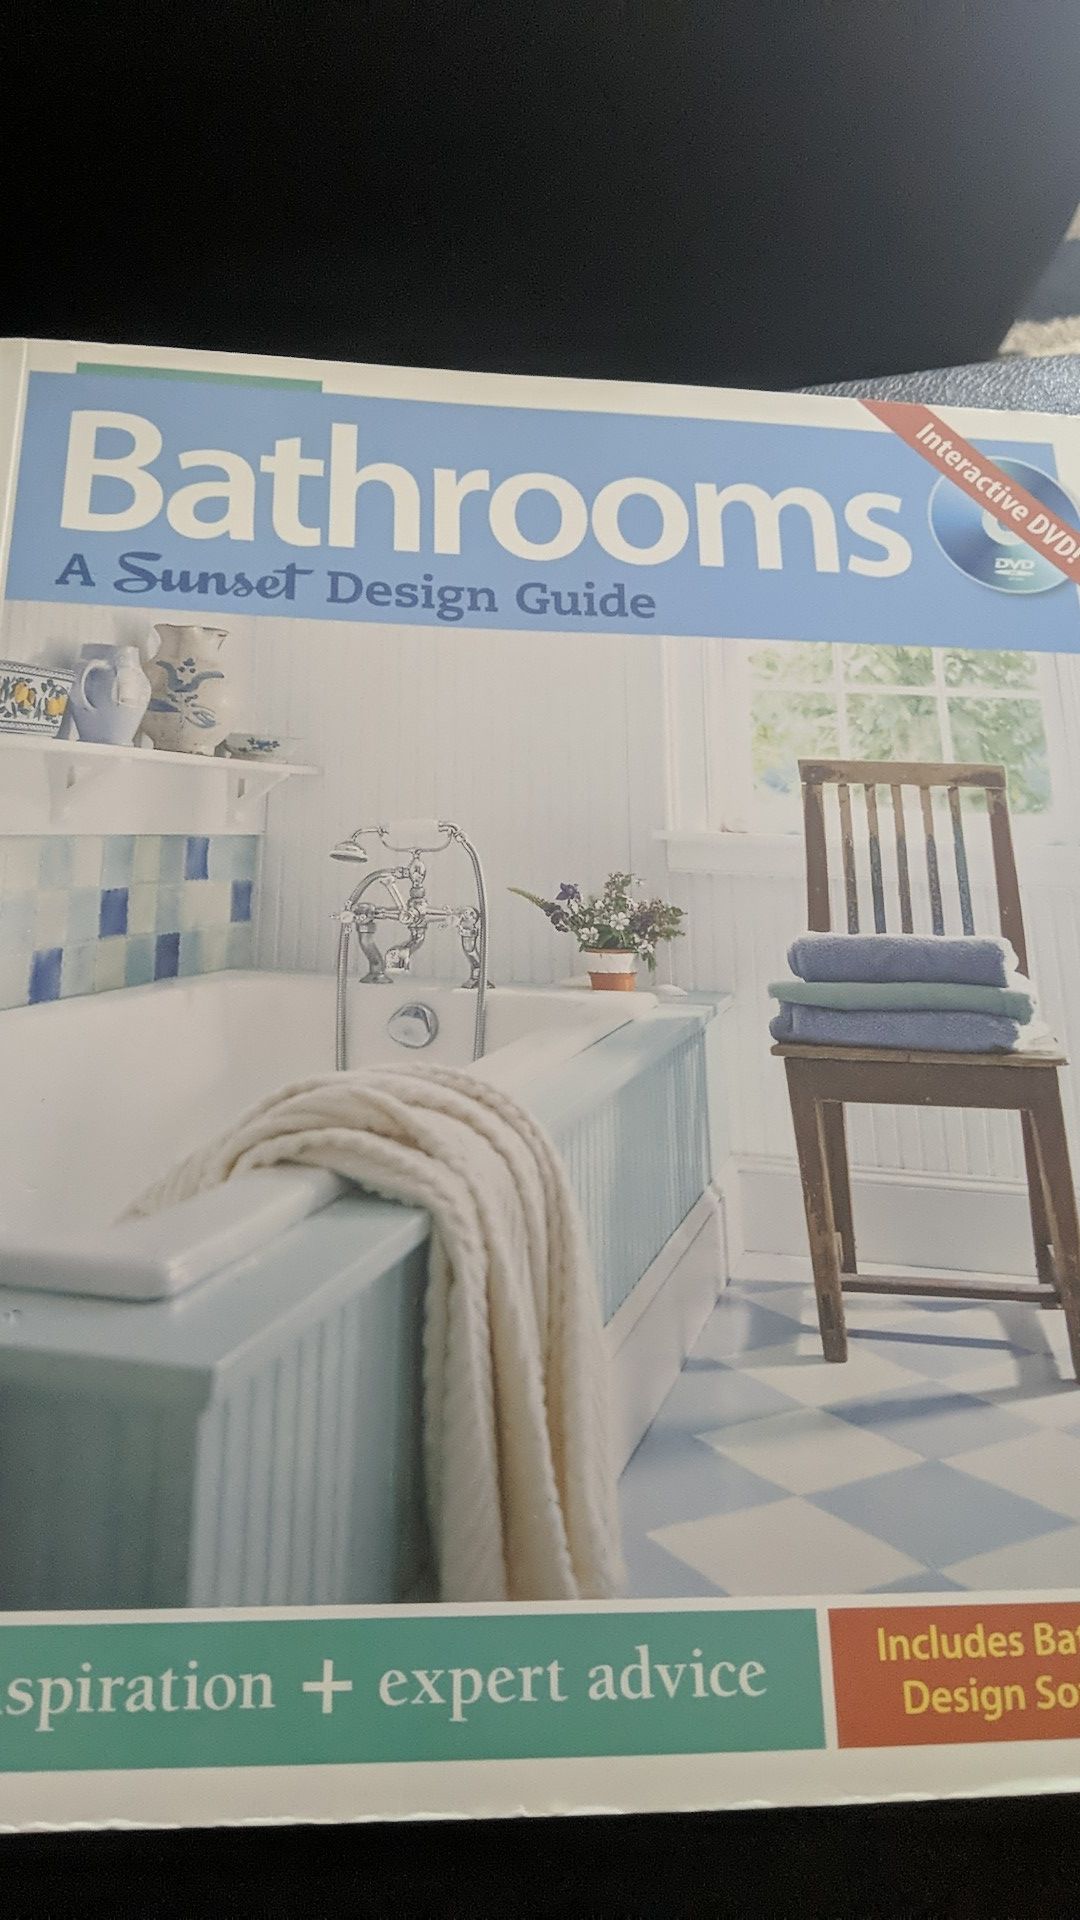 Bathrooms design guide with interactive DVD